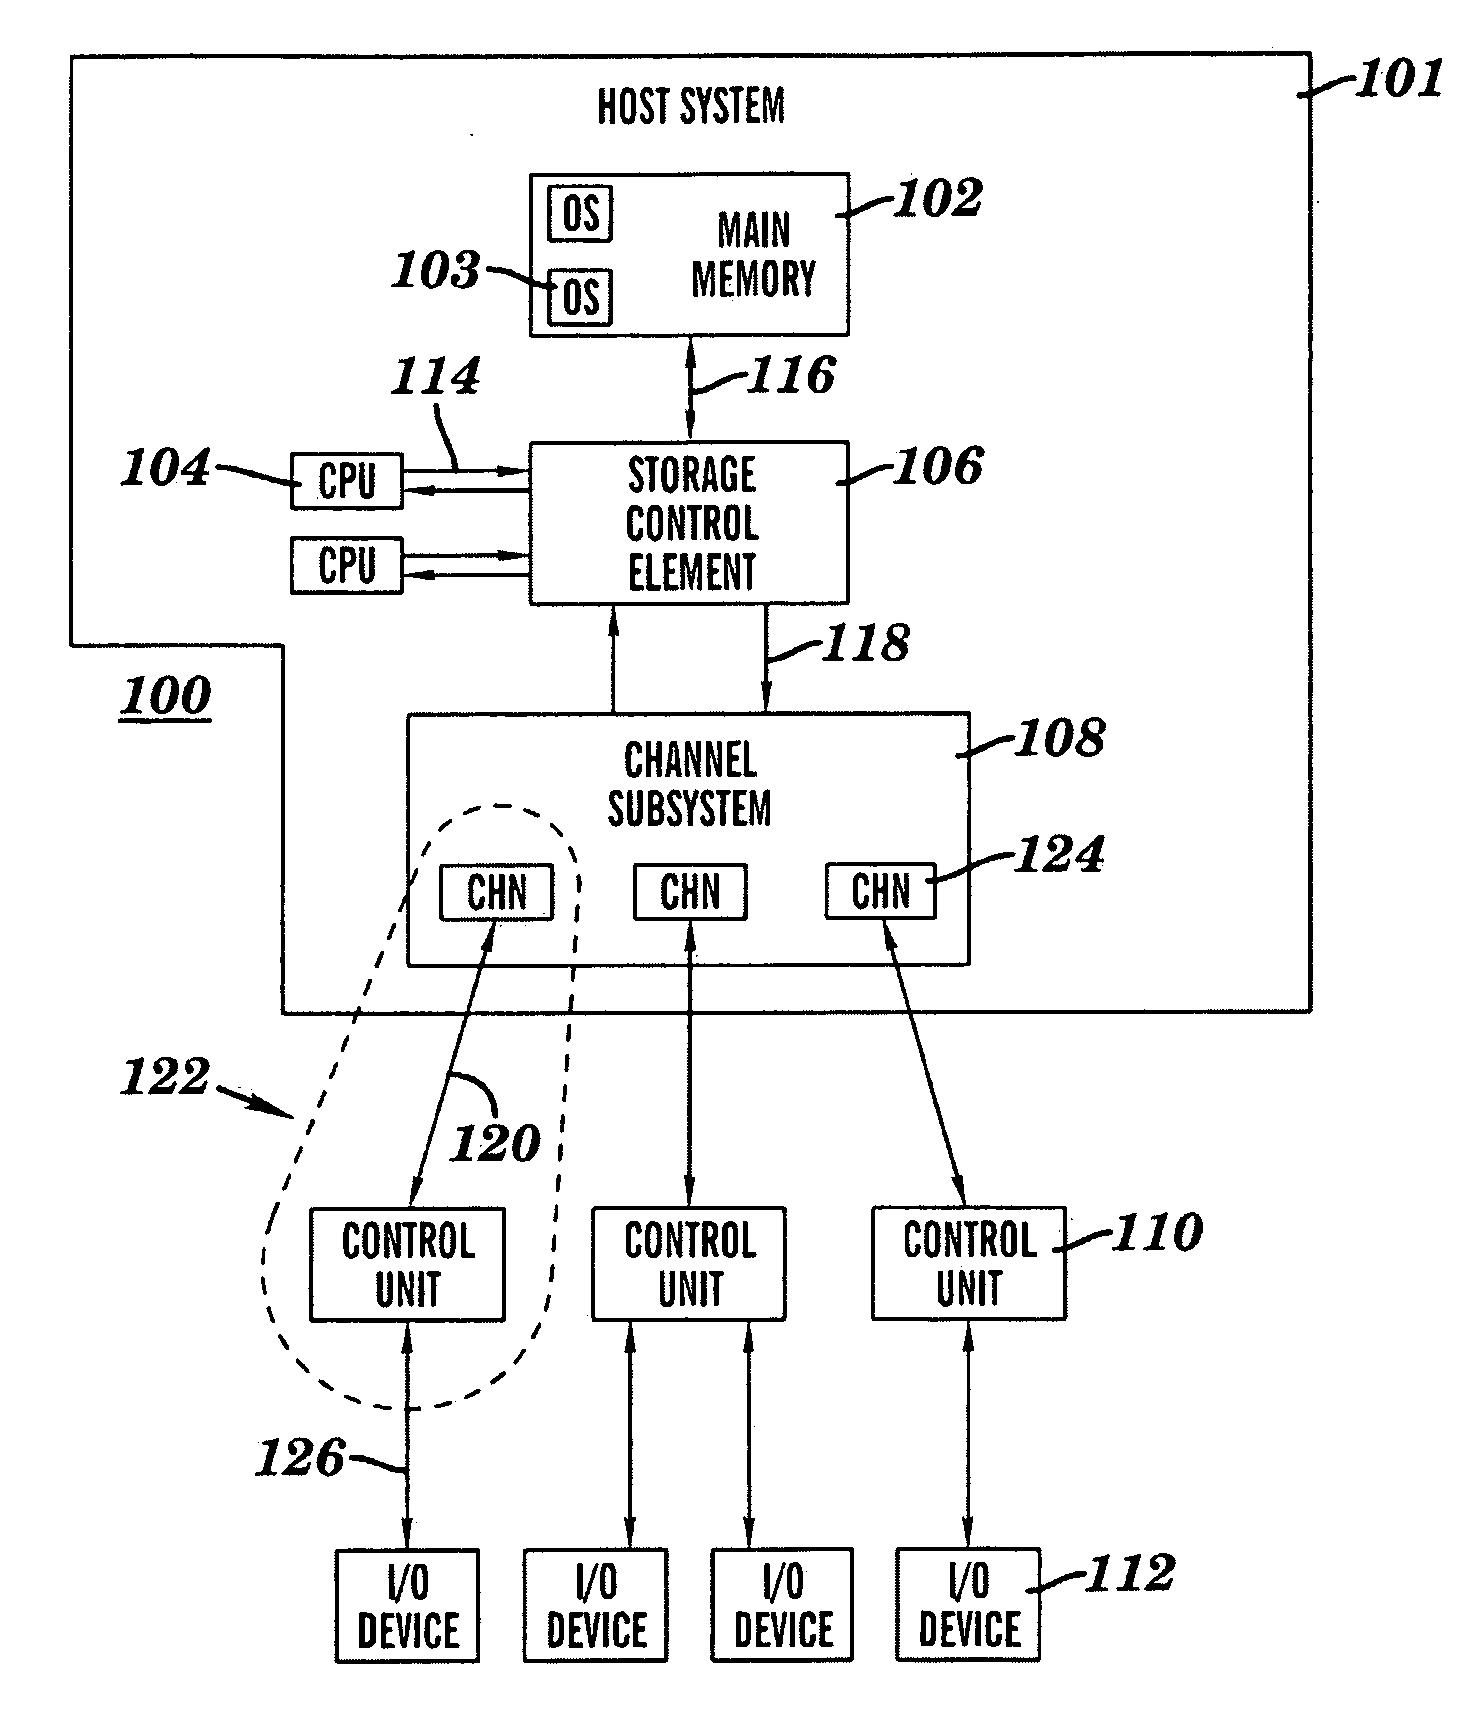 Computer command and response for determining the state of an I/O operation